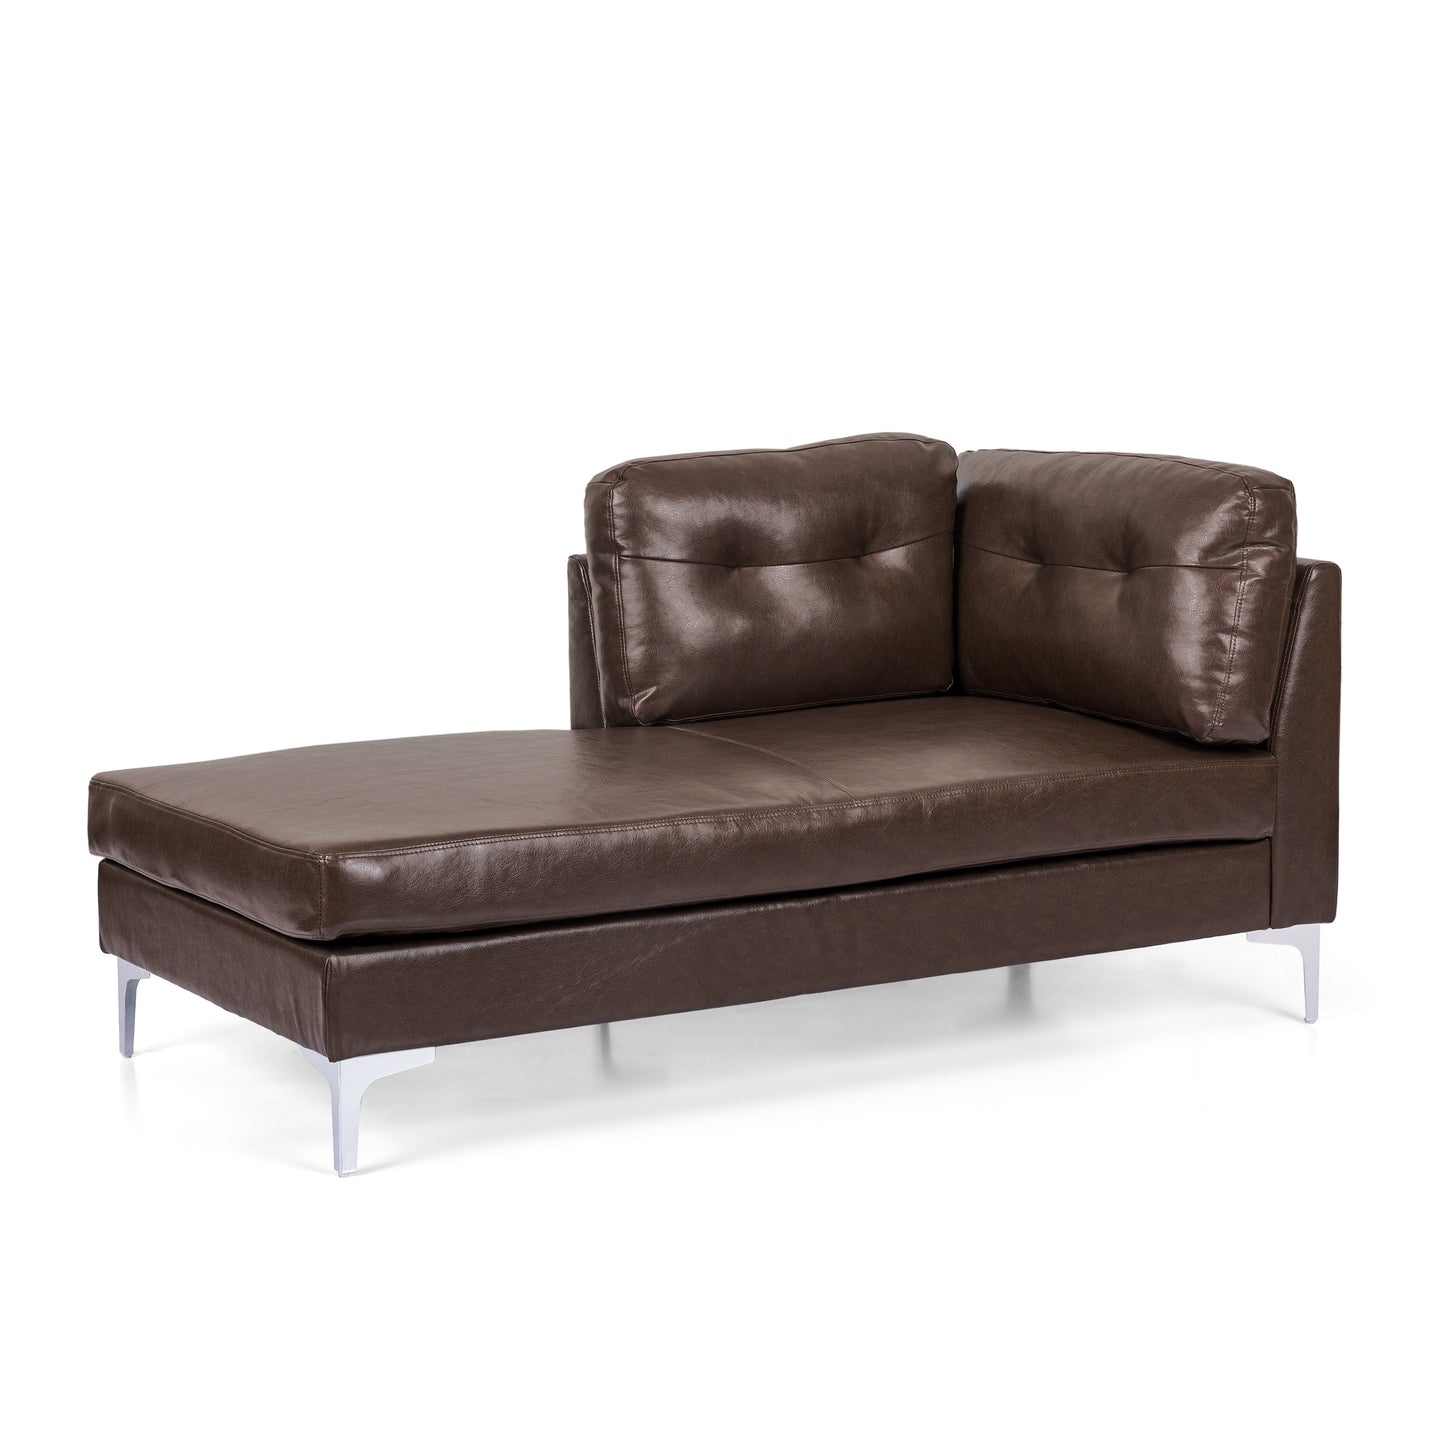 Dillonvale Contemporary Upholstered Chaise Lounge